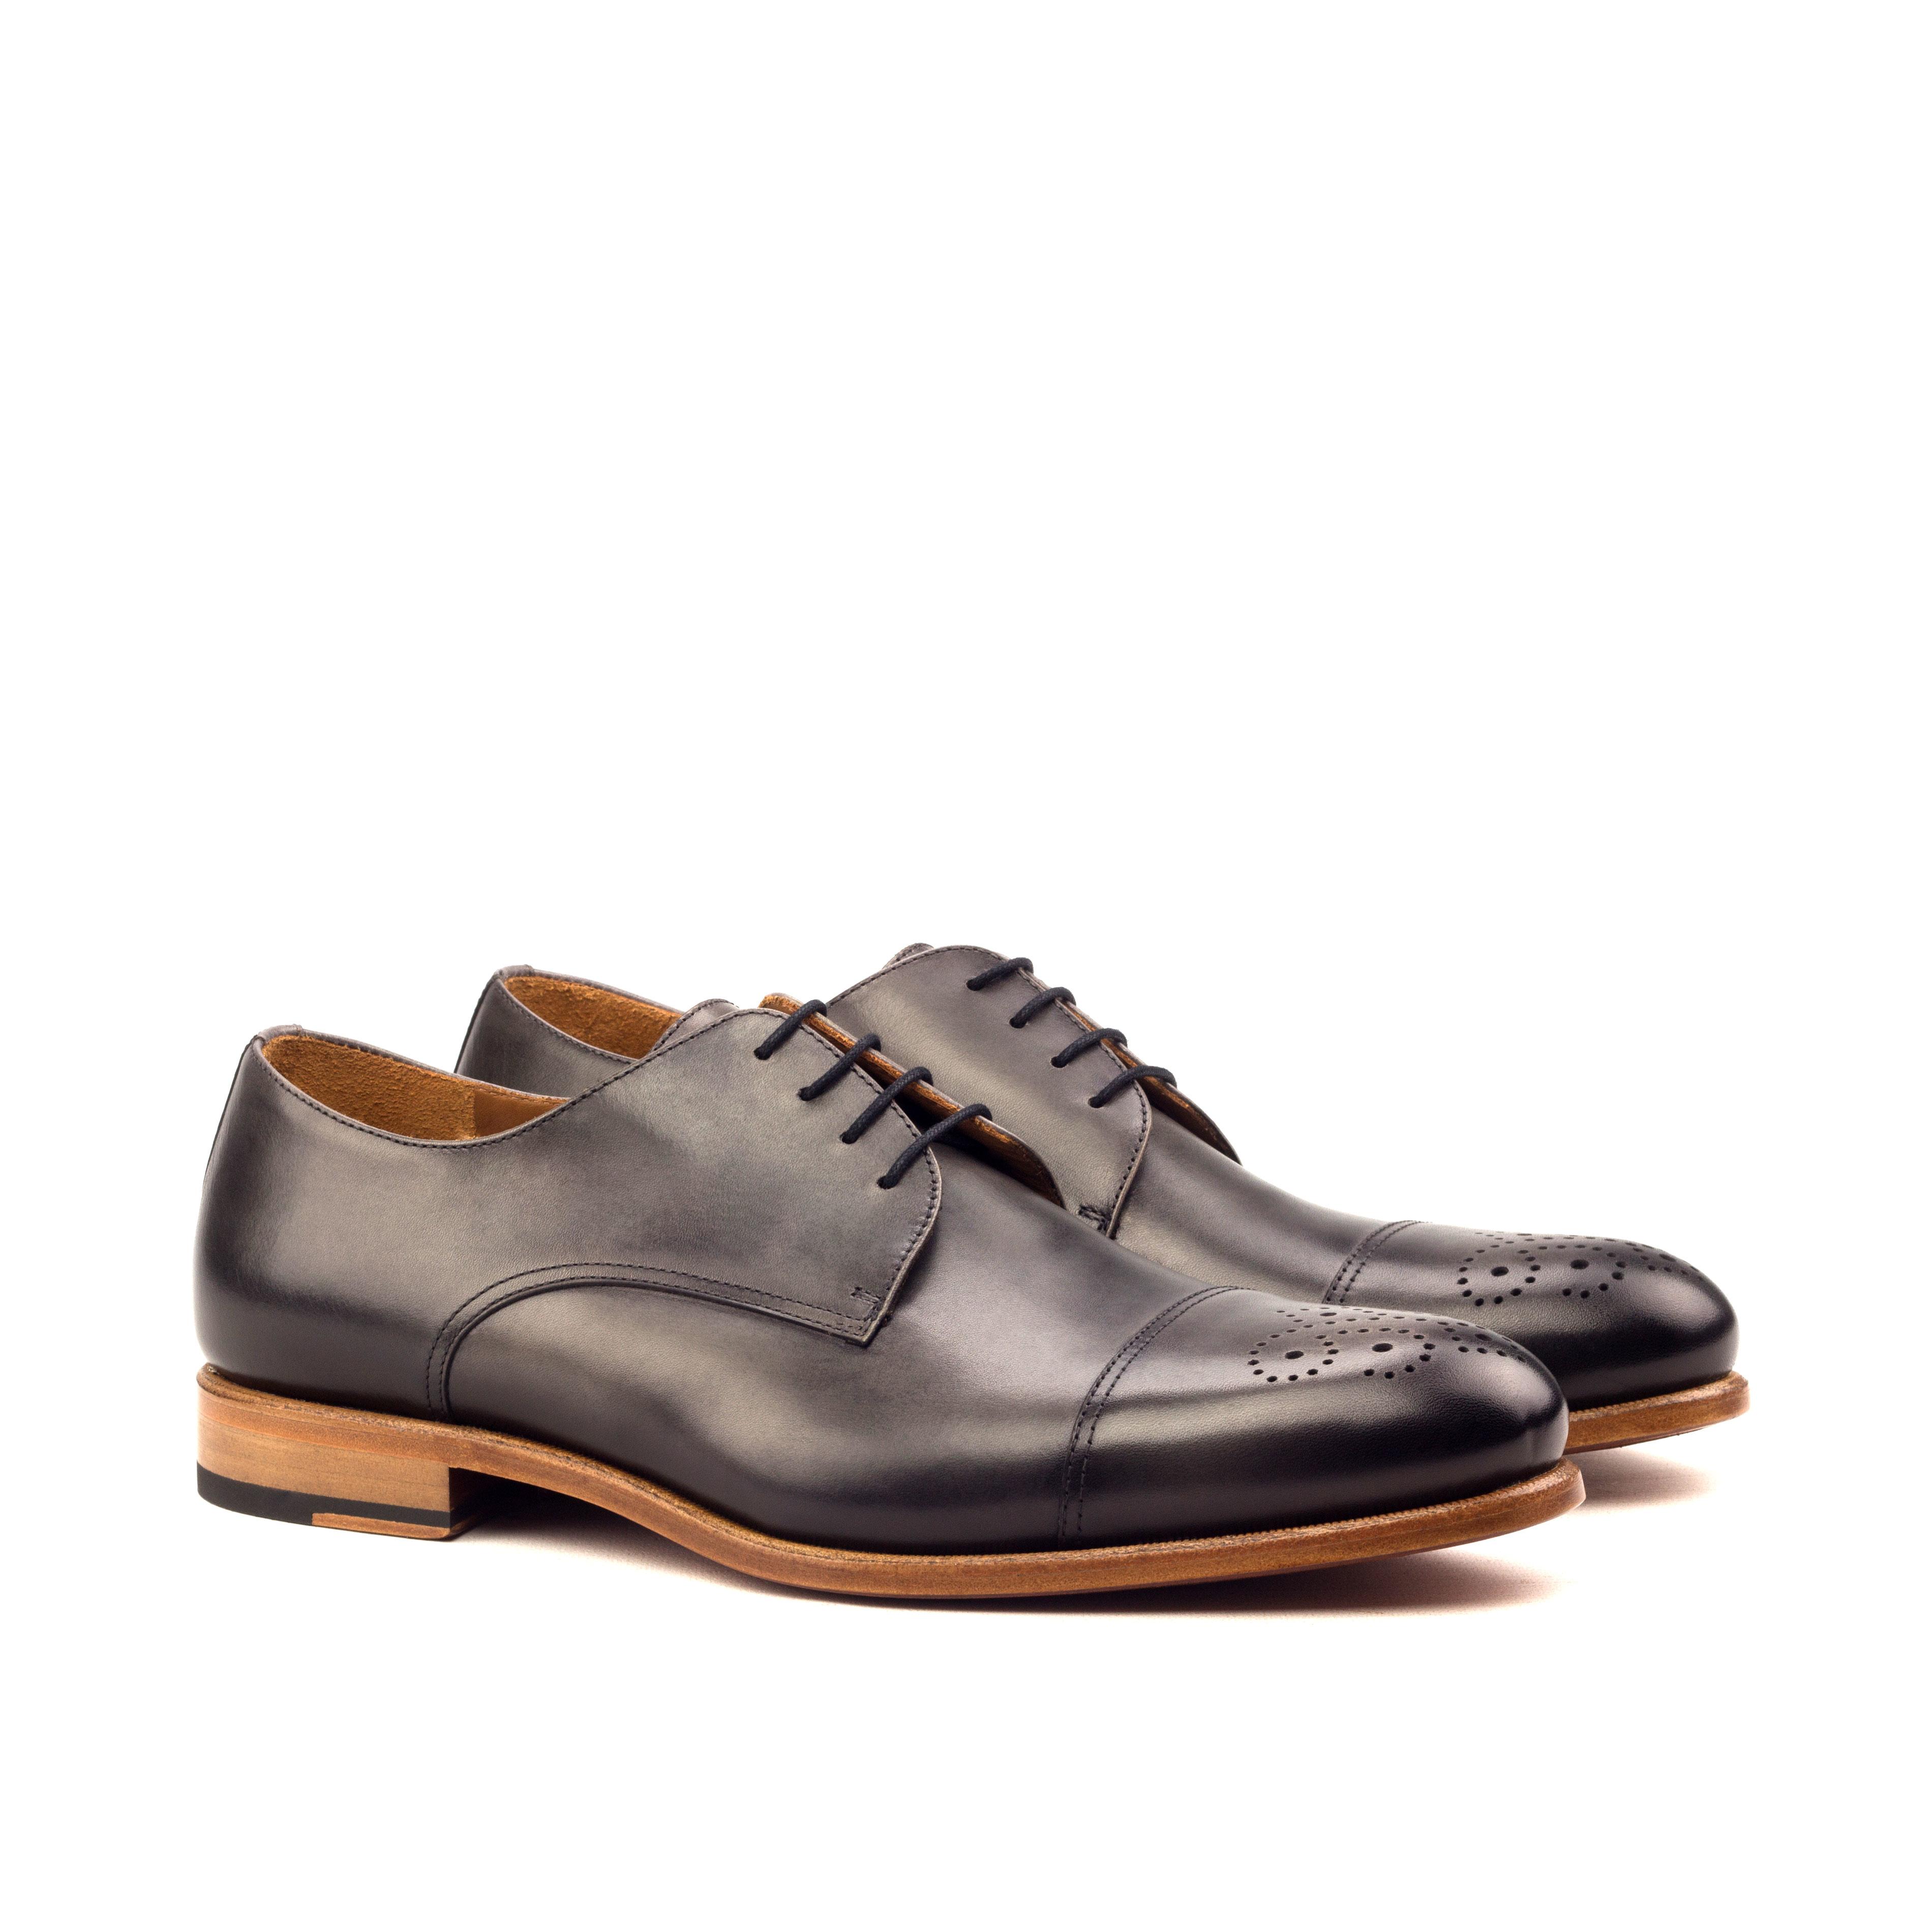 Manor of London 'The Derby' Burnished Painted Grey Calfskin Punched Toe Shoe Luxury Custom Initials Monogrammed Front Side View